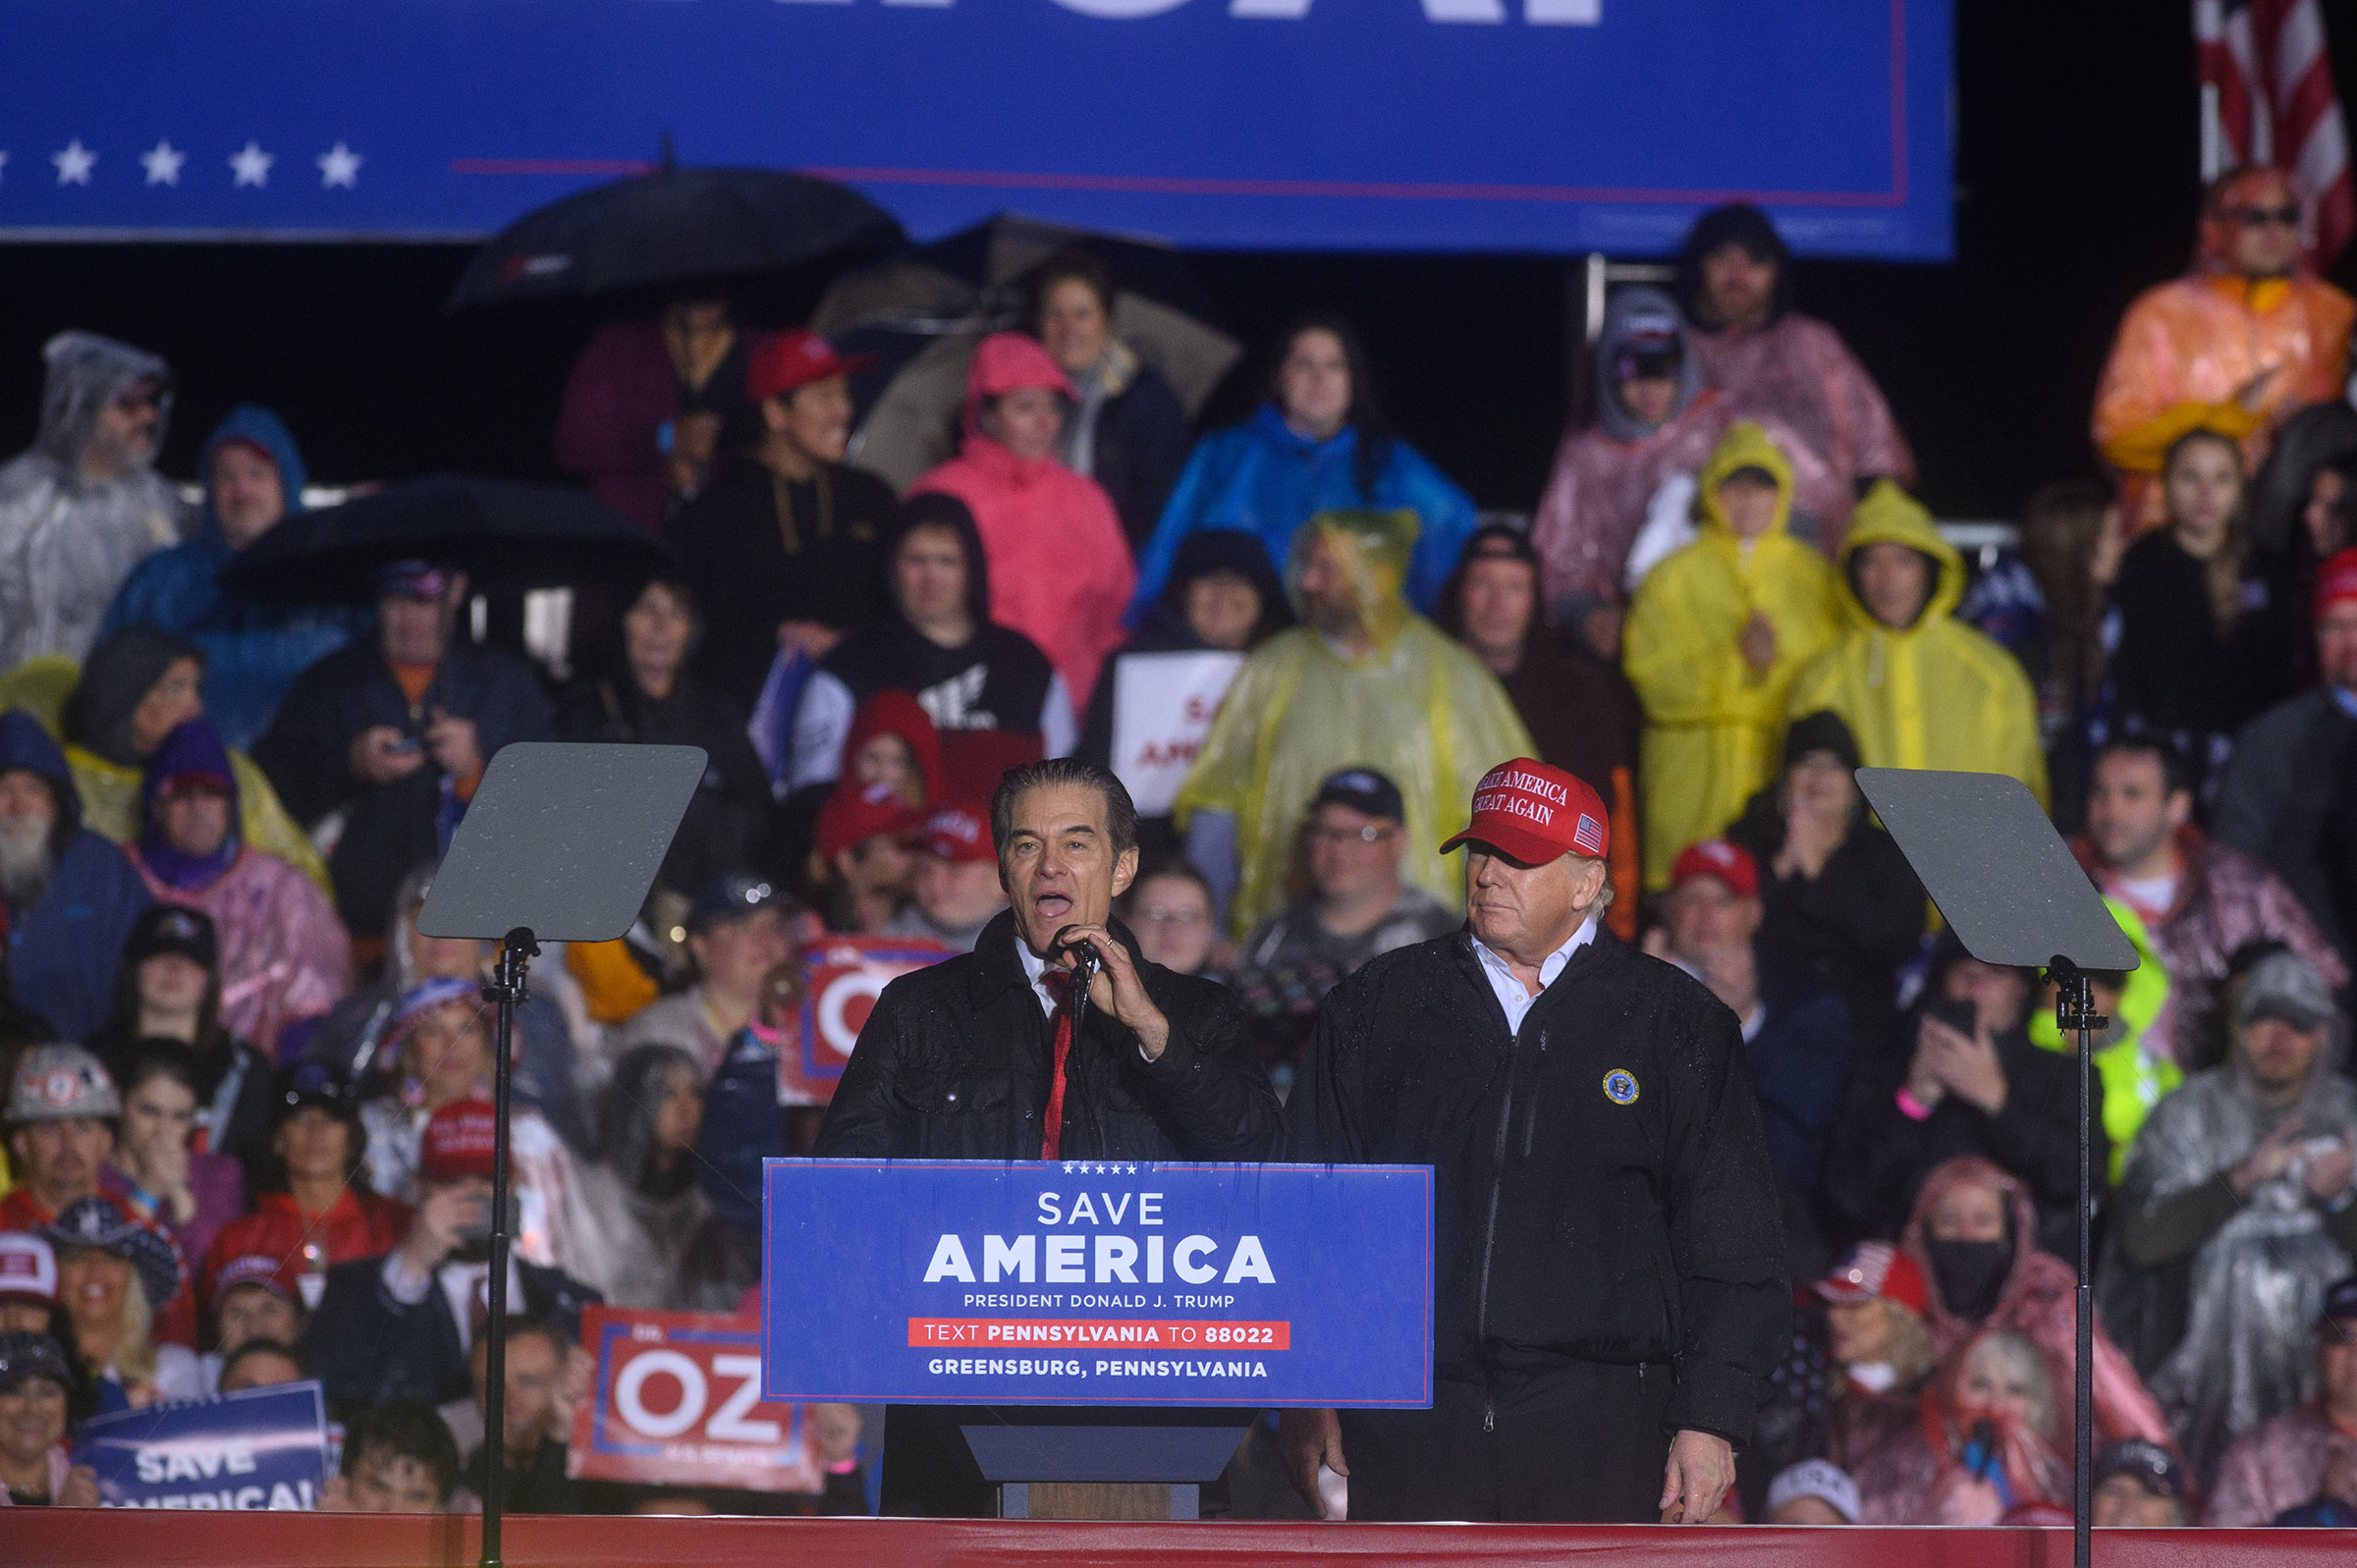 Mehmet Oz, celebrity physician and Republican Senate candidate for Pennsylvania, speaks during a 'Save America' rally with former President Donald Trump in Greensburg, Pa., on May 6, 2022. (Justin Merriman—Bloomberg/Getty Images)